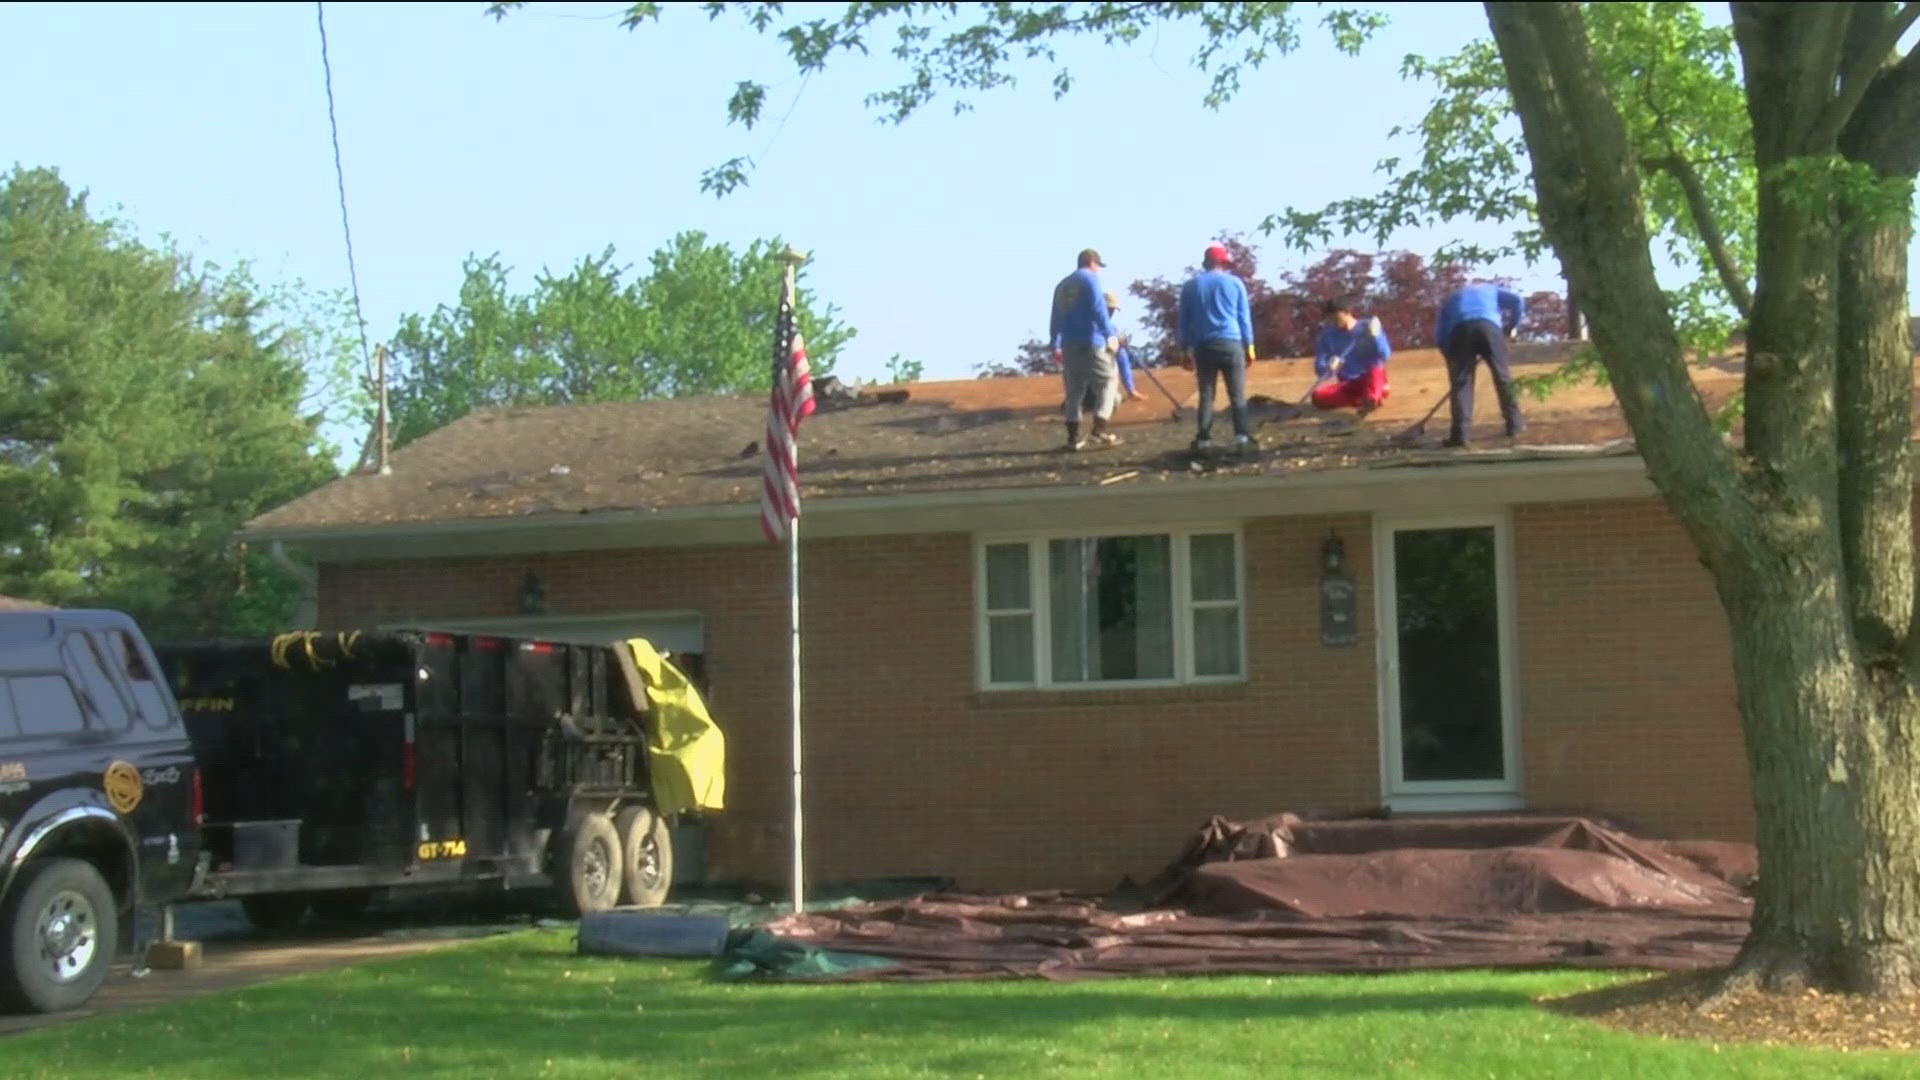 Gold Medal Roofing and Atlas Shingles gifted labor and materials to replace the woman's roof, which had been damaged in a storm.